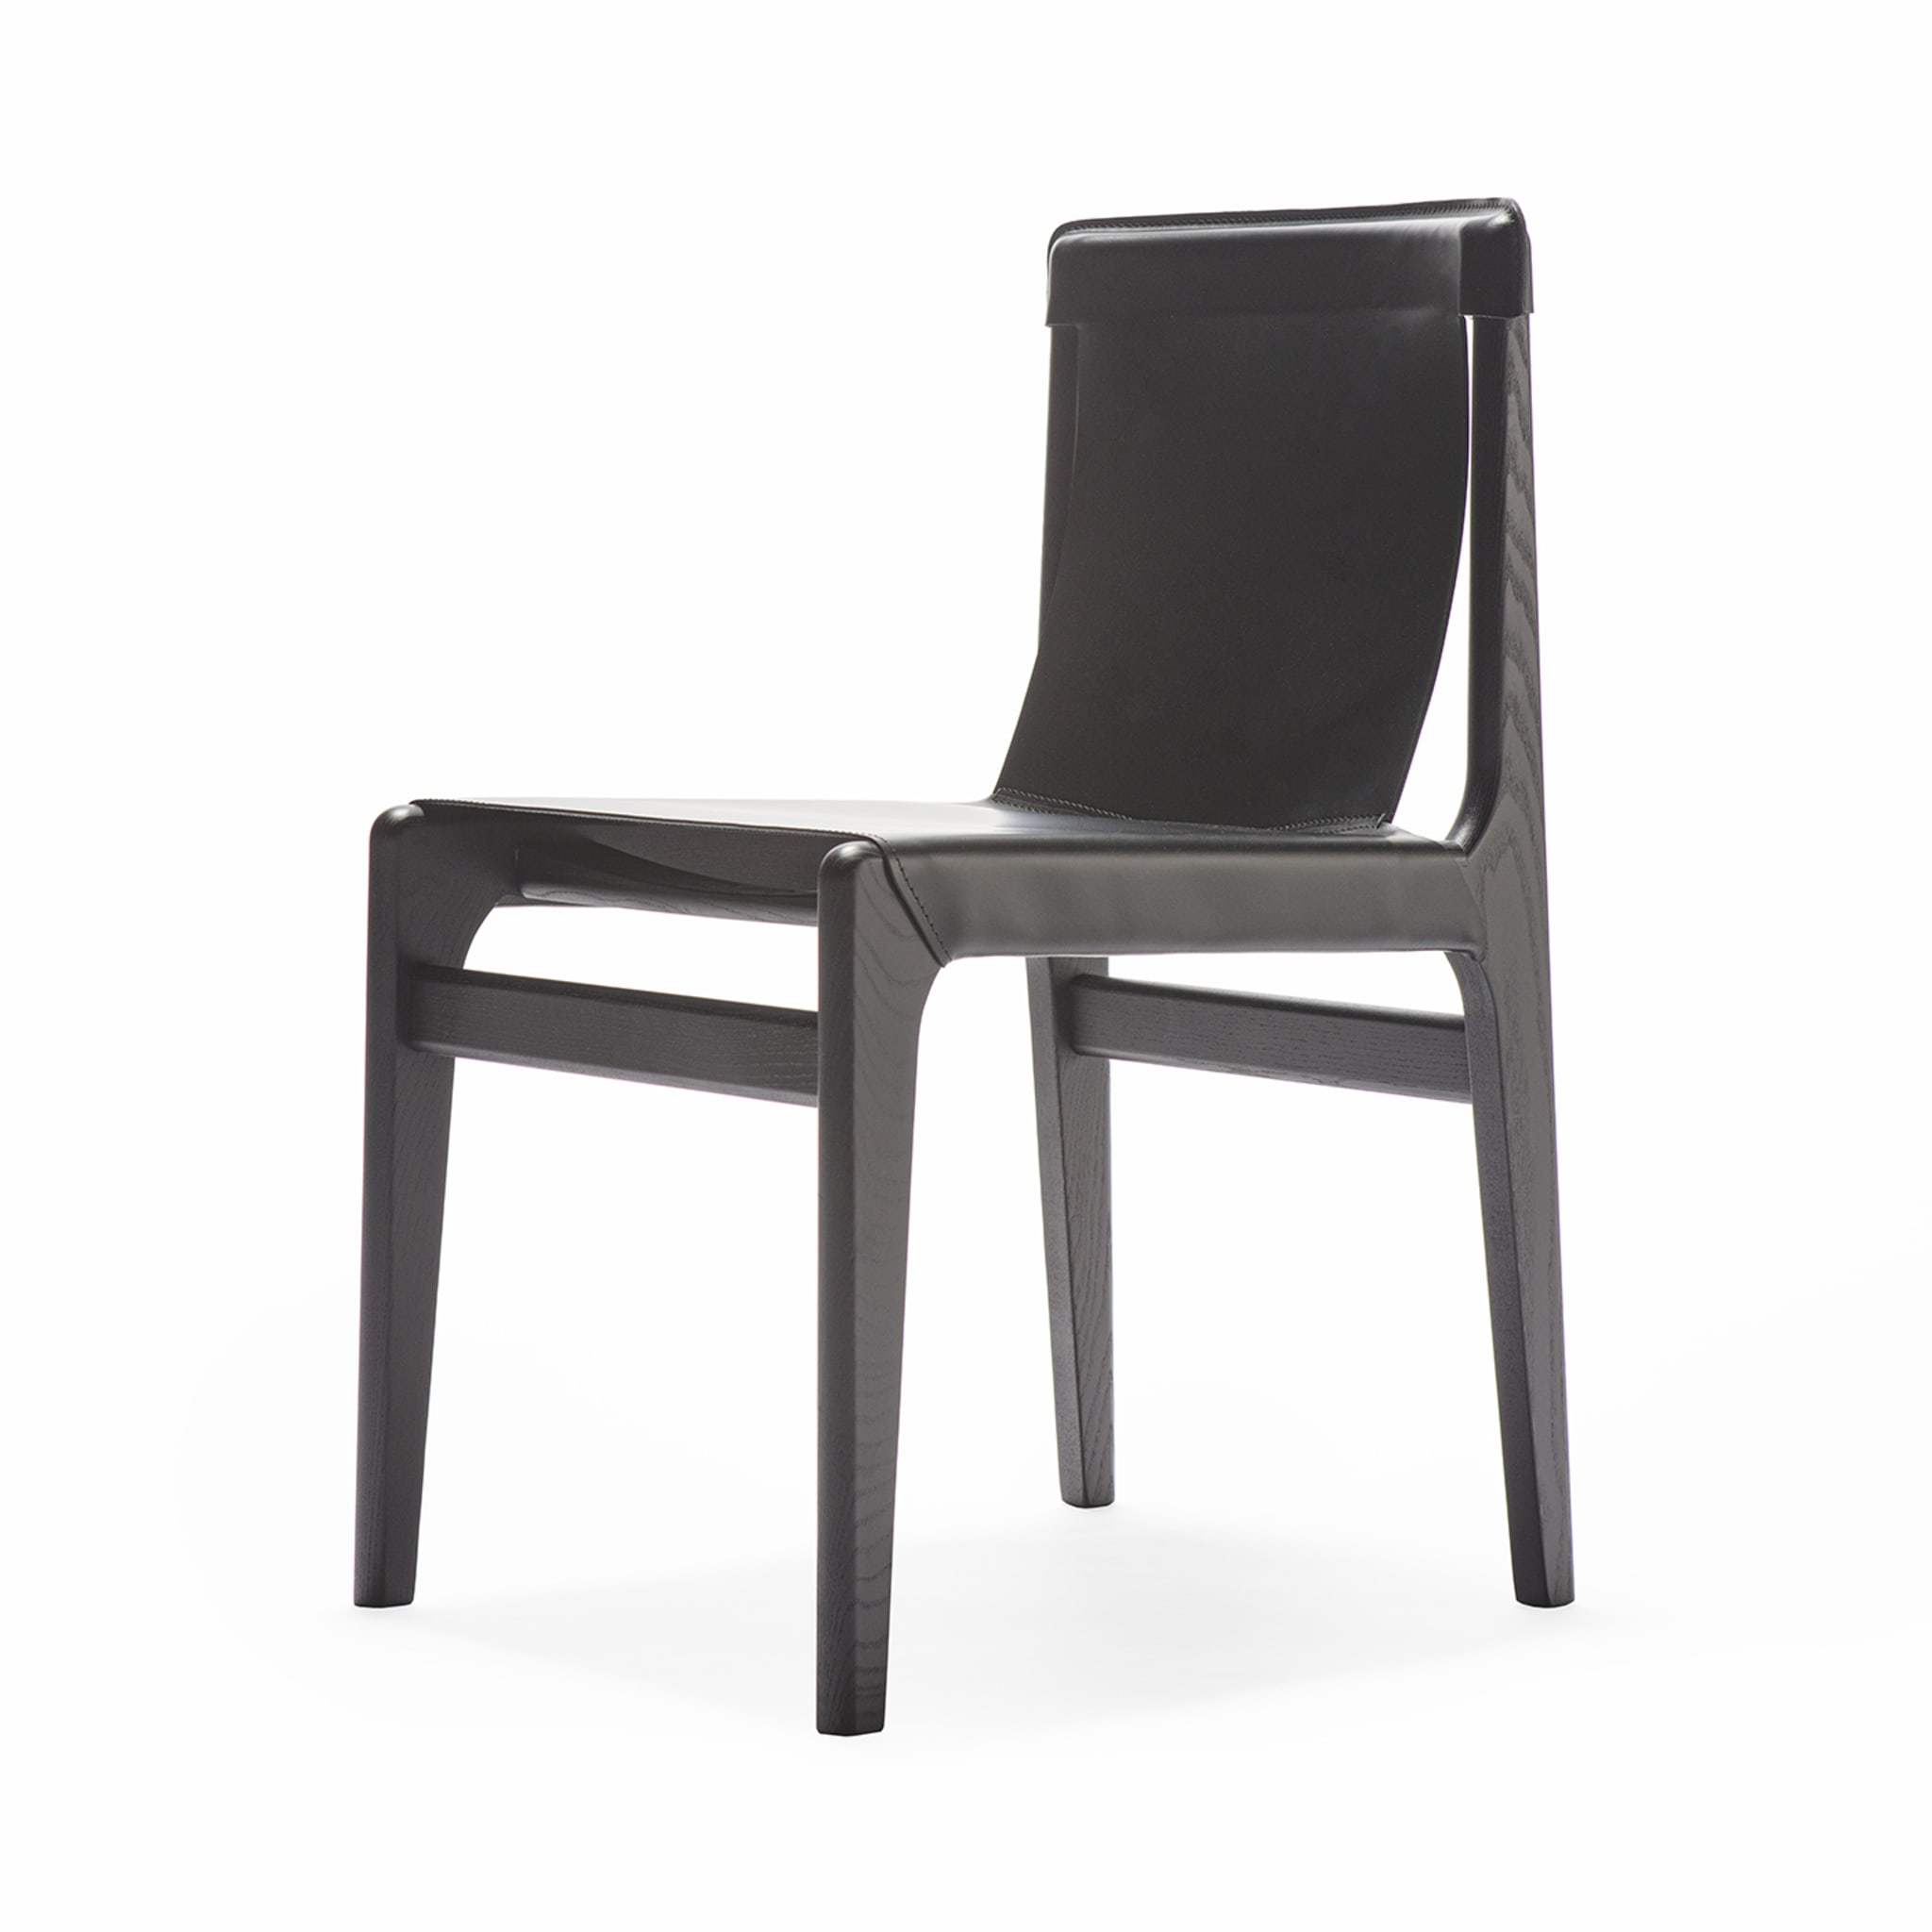 Burano Black Leather Chair by Balutto Associati - Alternative view 2